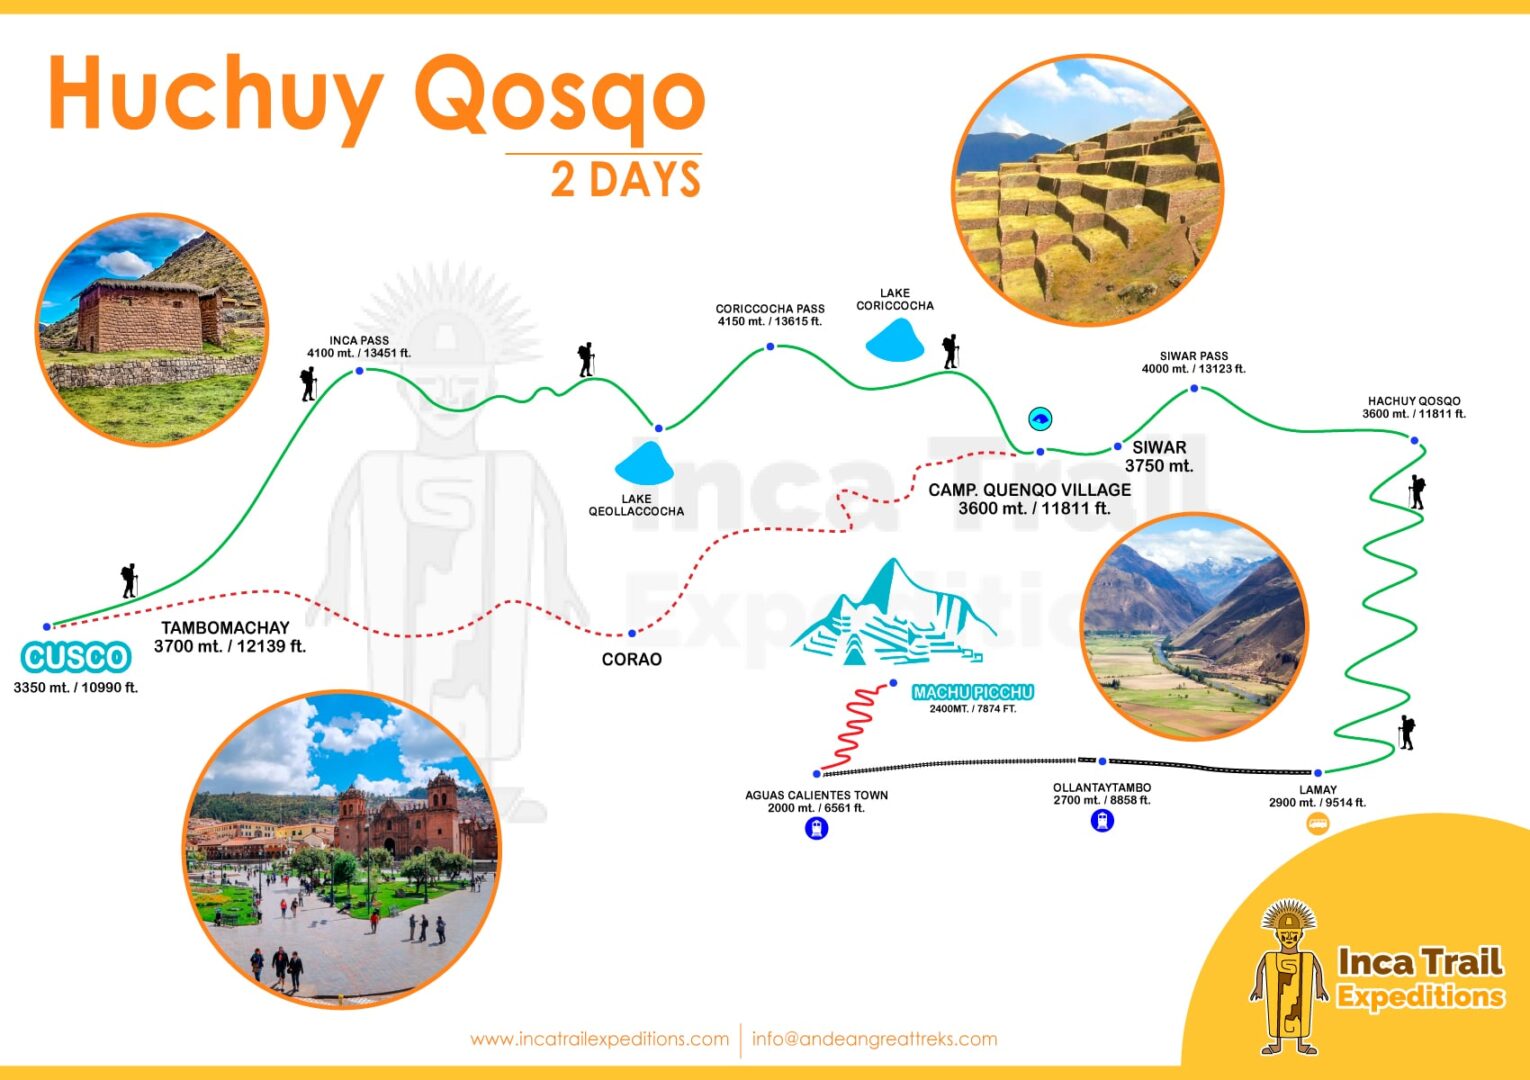 HUCHUY-QOSQO-2-DAYS-BY-INCA-TRAIL-EXPEDITIONS